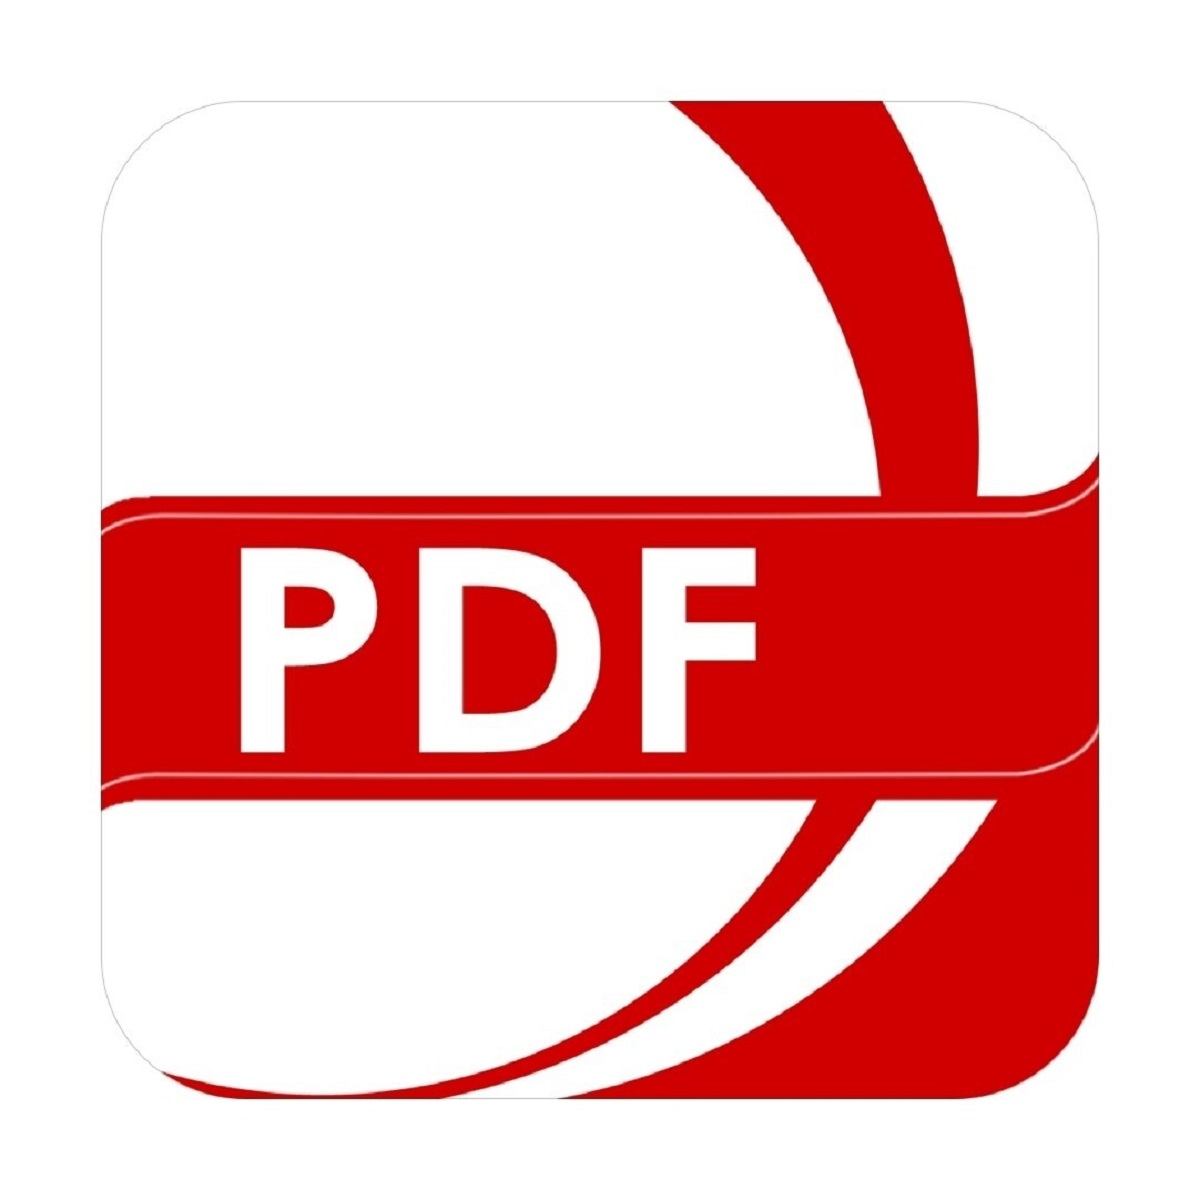 pdf complete download free full version